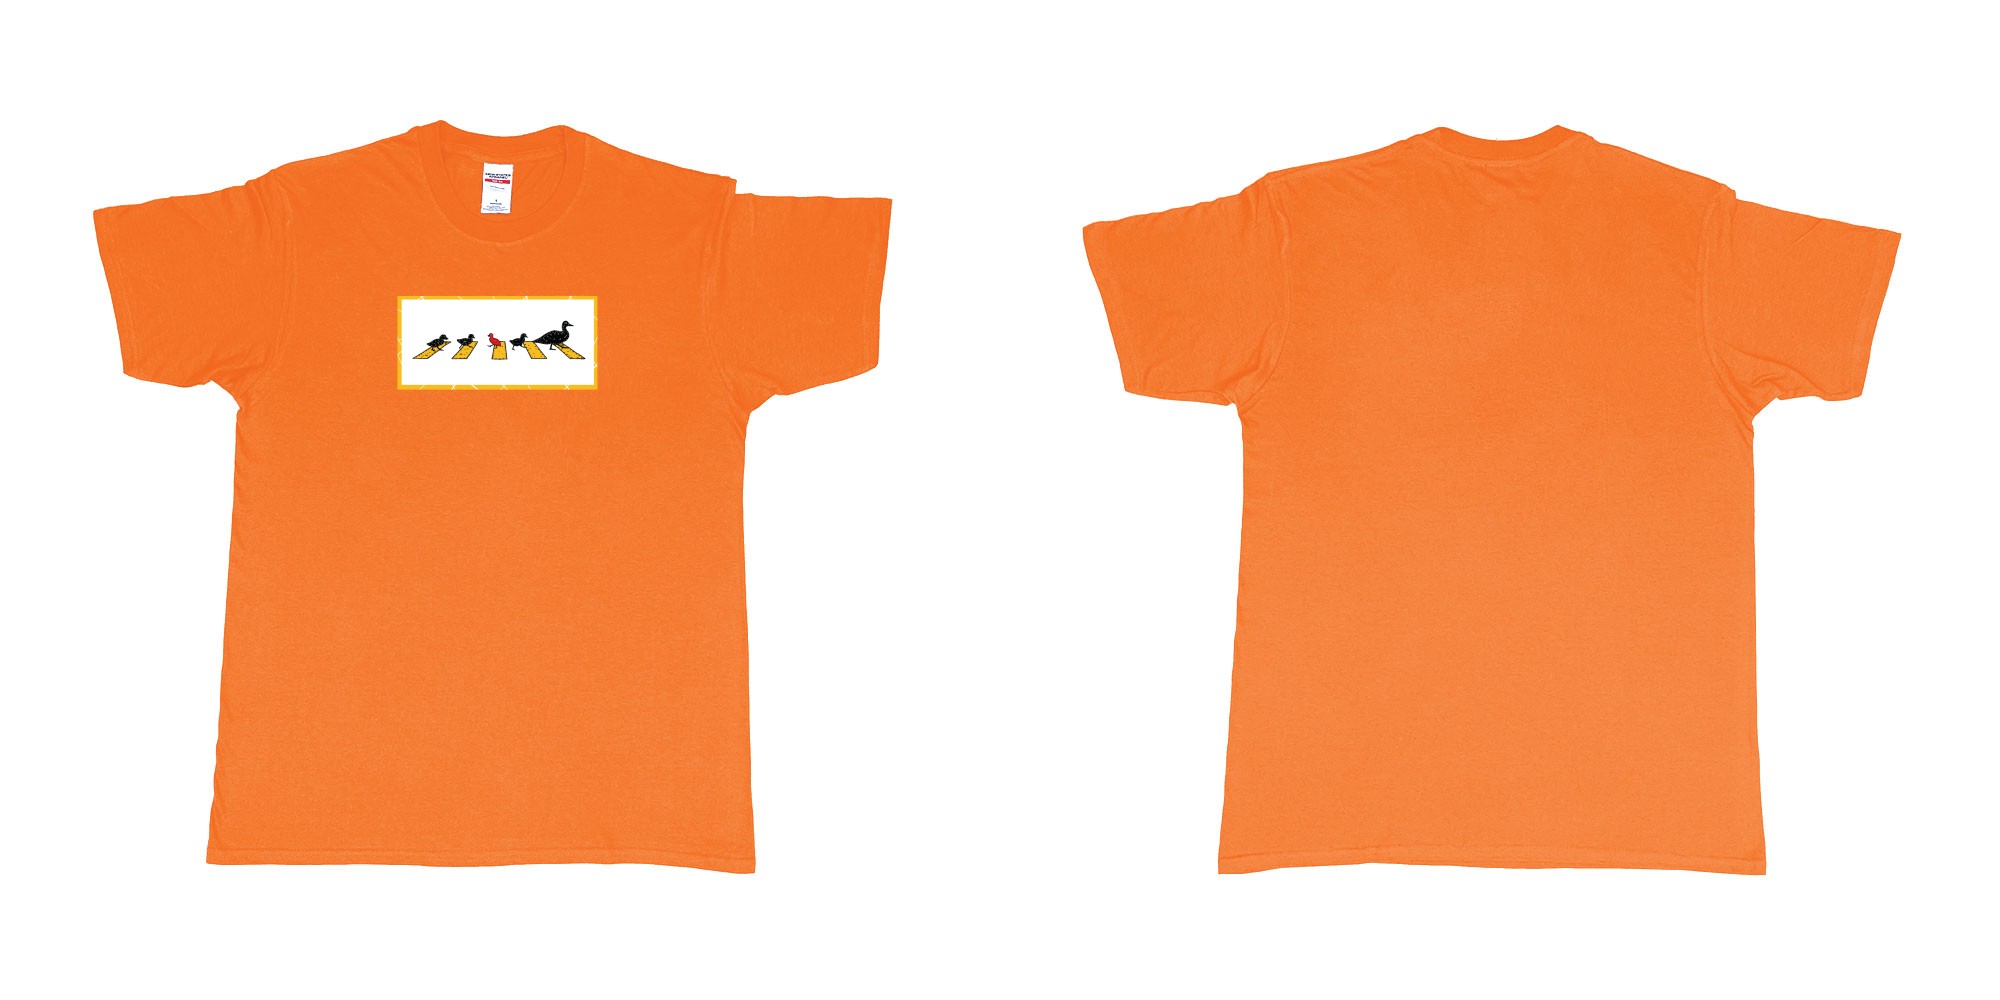 Custom tshirt design 4481 ducks in fabric color orange choice your own text made in Bali by The Pirate Way